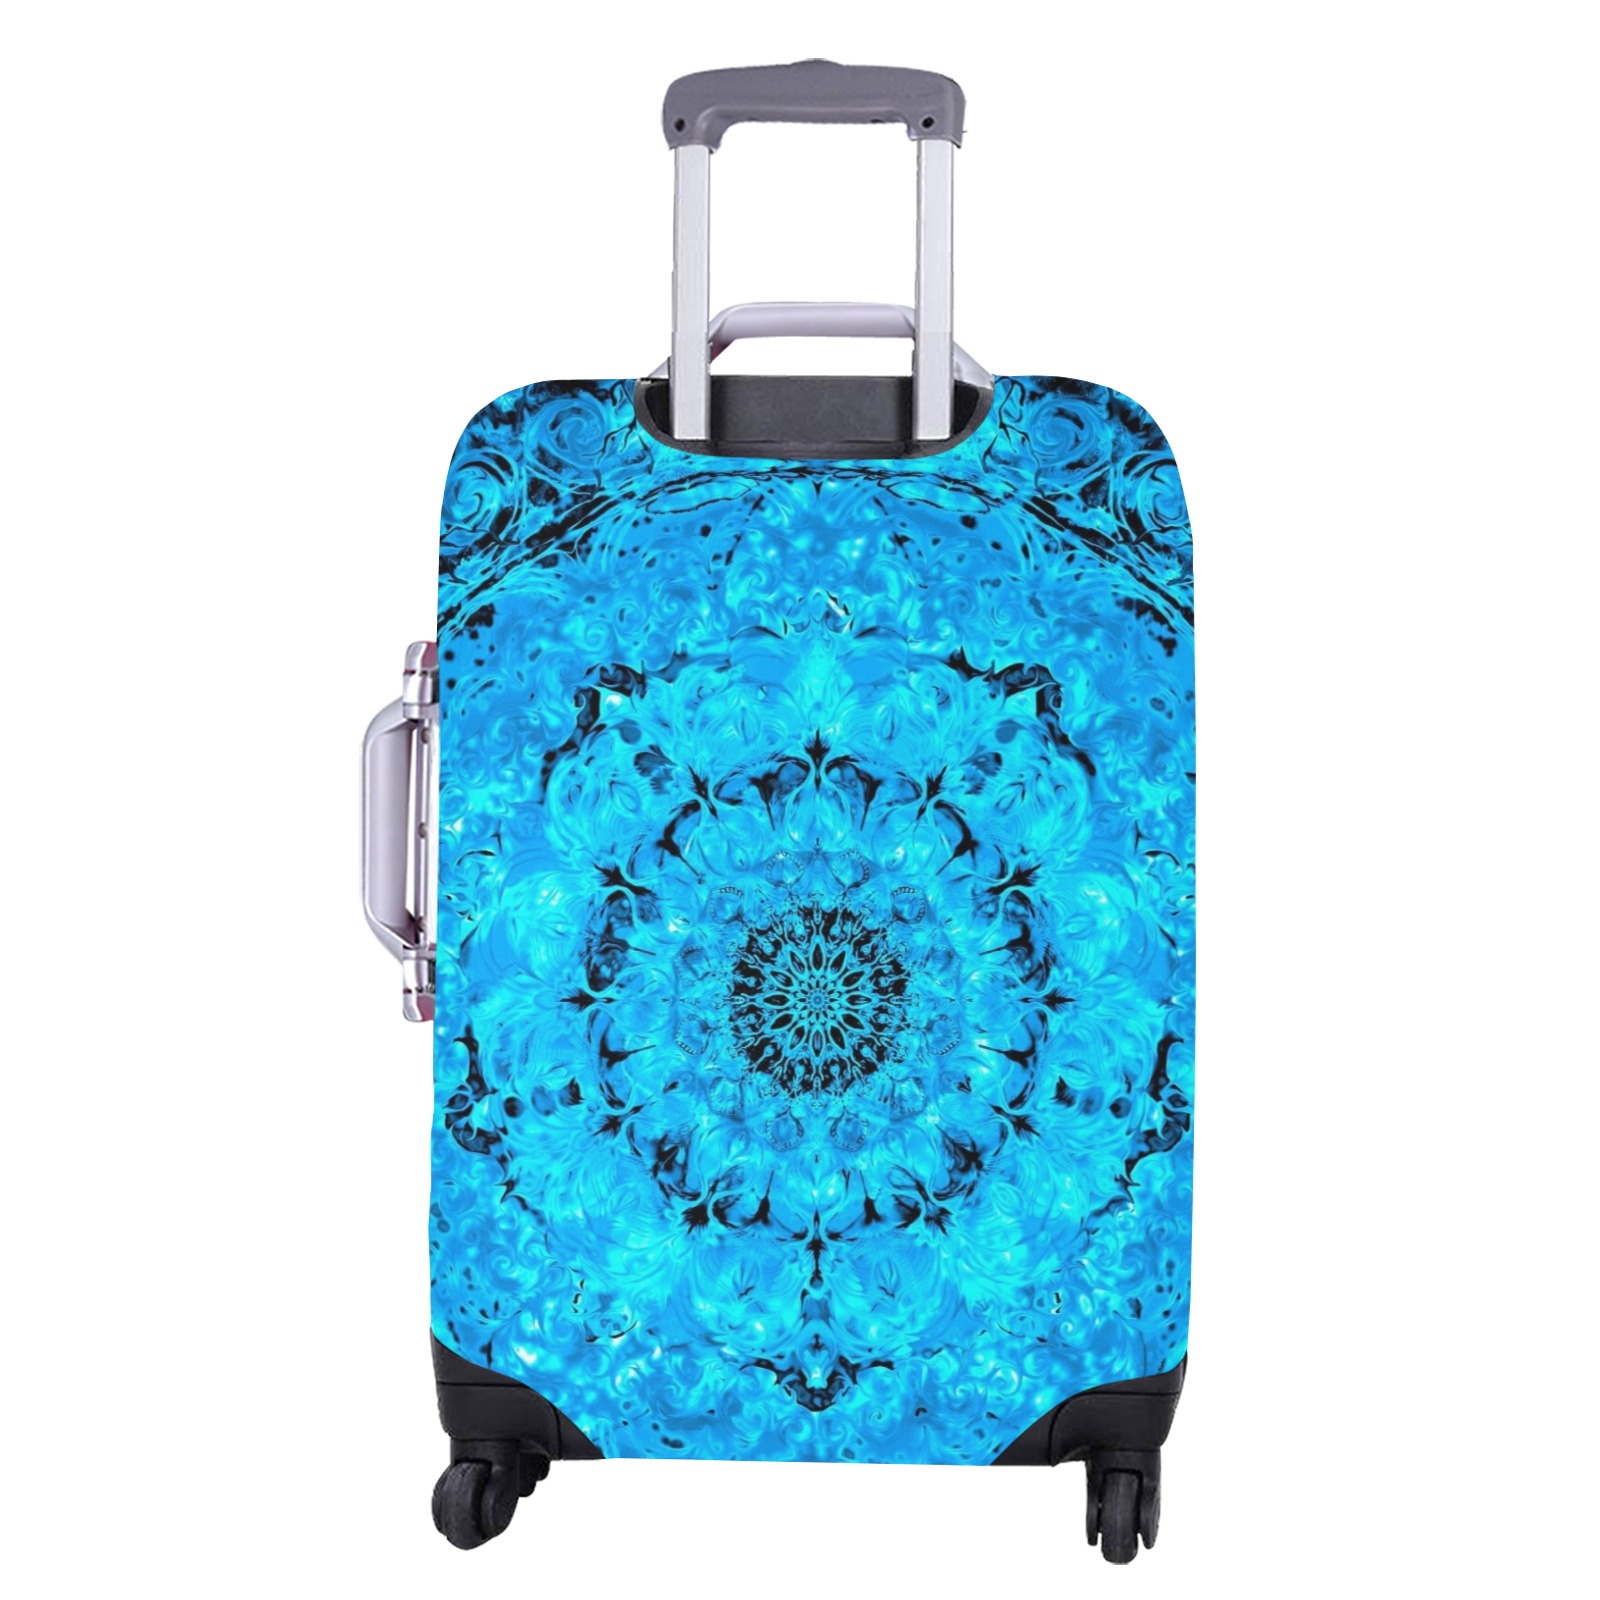 light and water 2-2 Luggage Cover/Extra Large 28"-30"